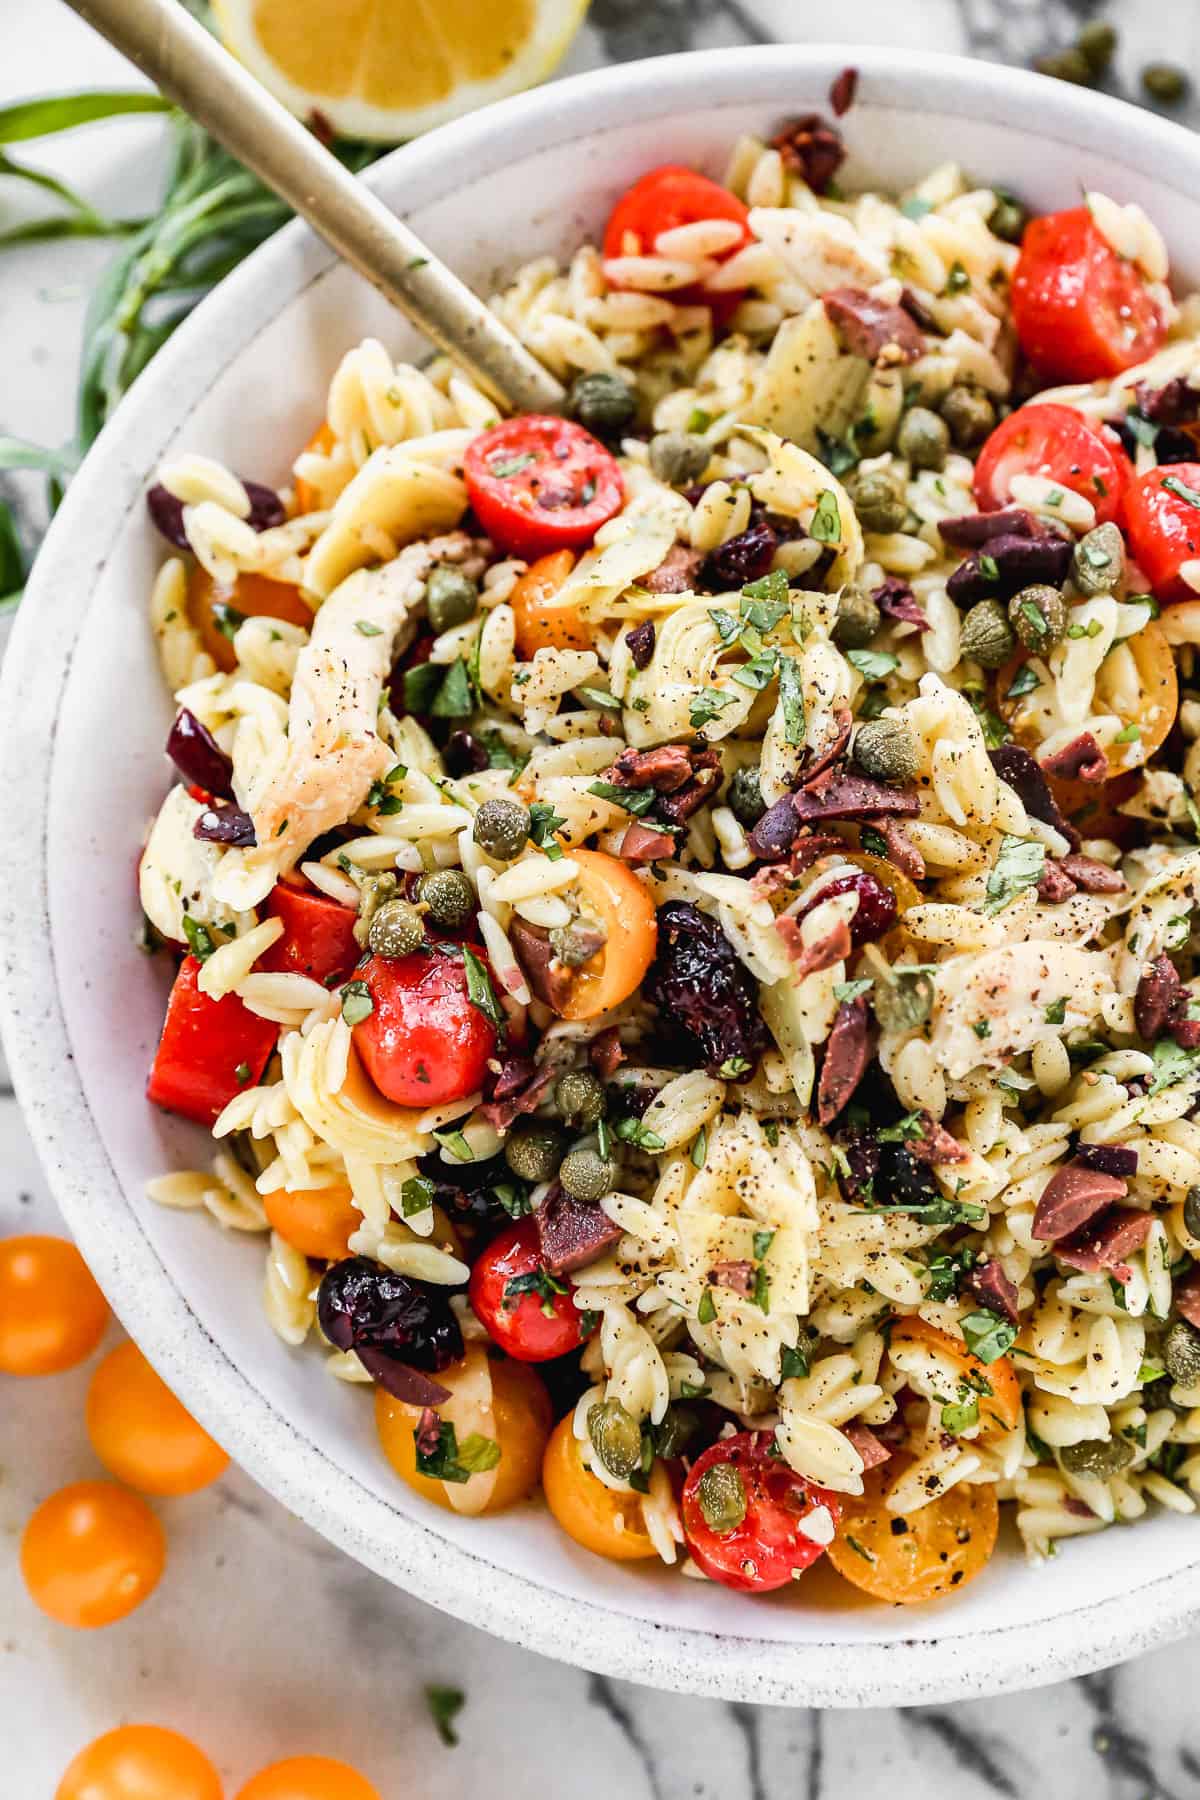 A close up image of a bowl of Orzo pasta salad, ready to enjoy.